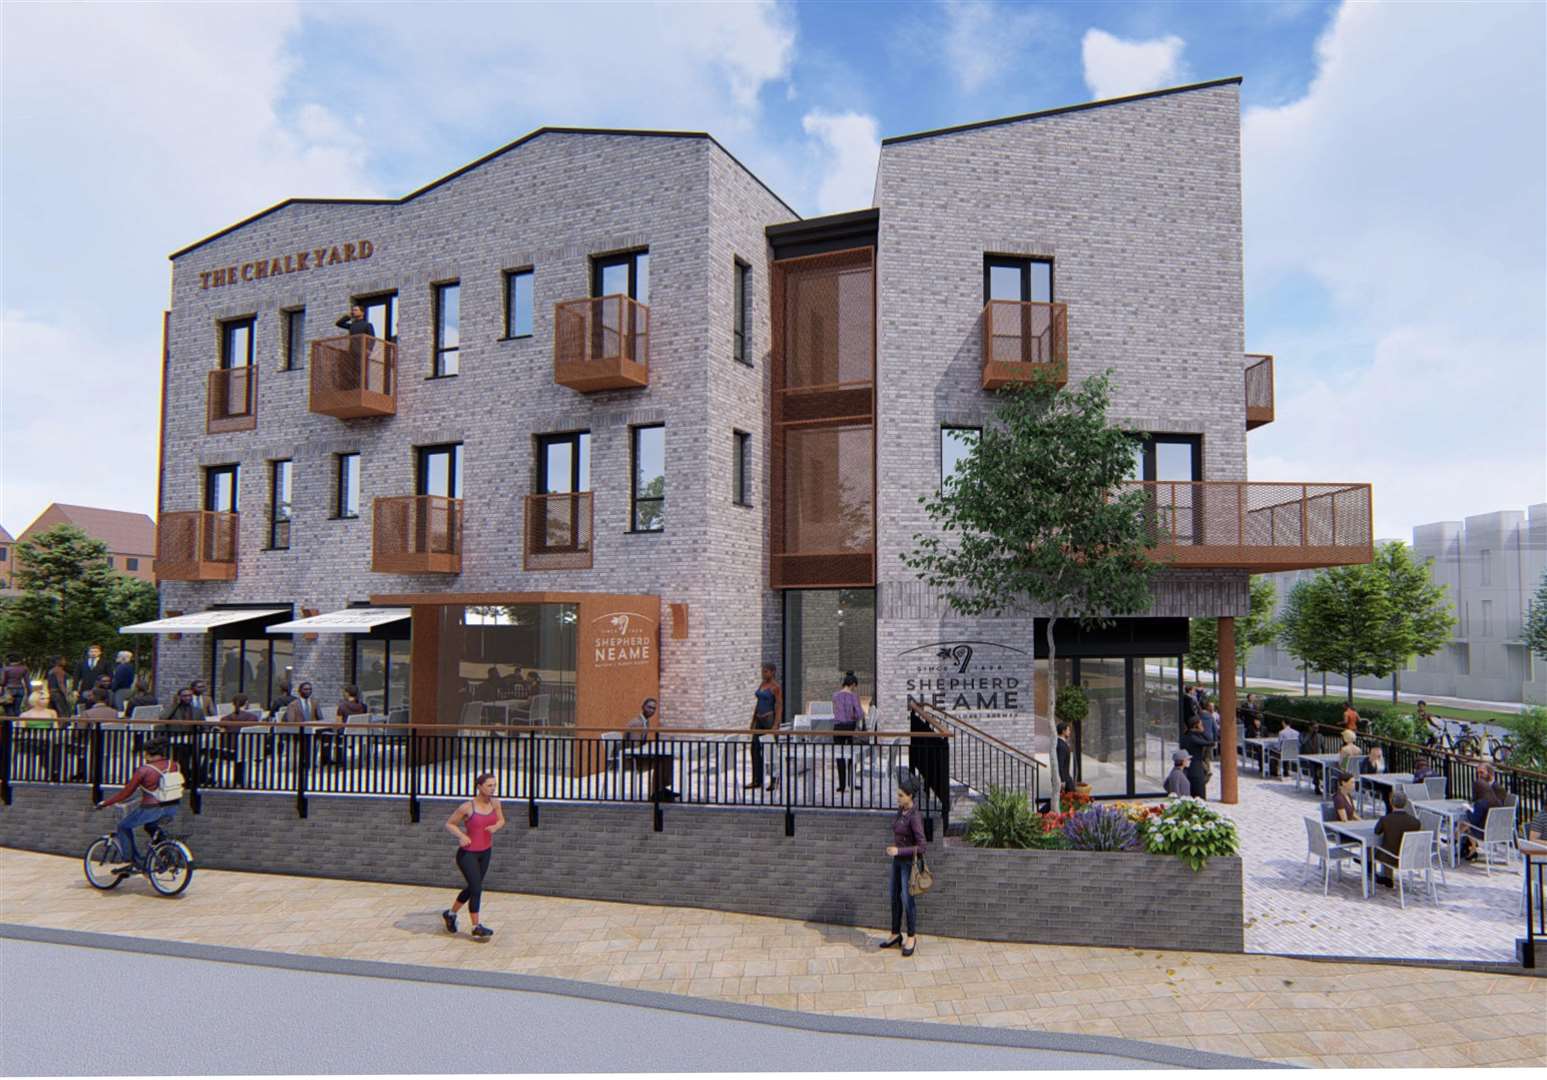 Shepherd Neame says it is still committed to building The Chalk Yard in Castle Hill. Picture: Ebbsfleet Development Company